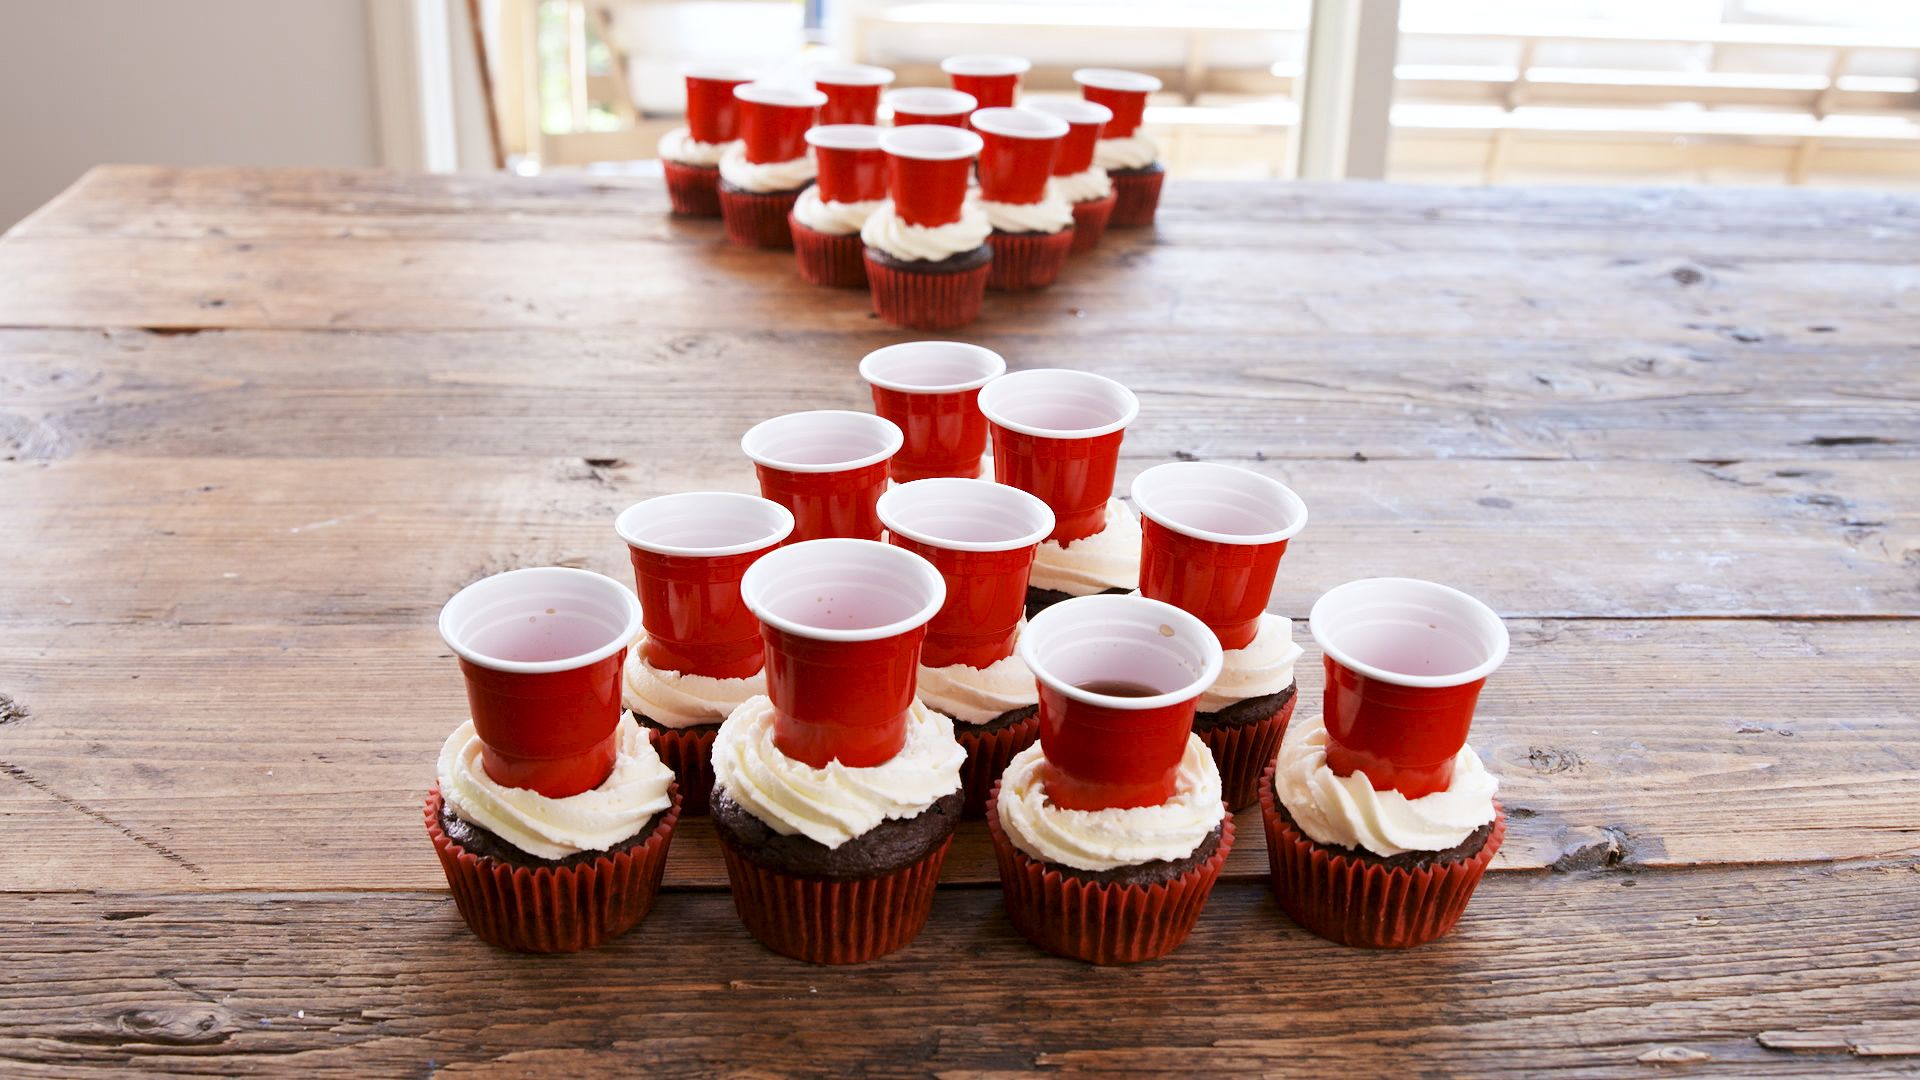 Beer Pong Cupcakes Recipe - How to Make Beer Pong Cupcakes